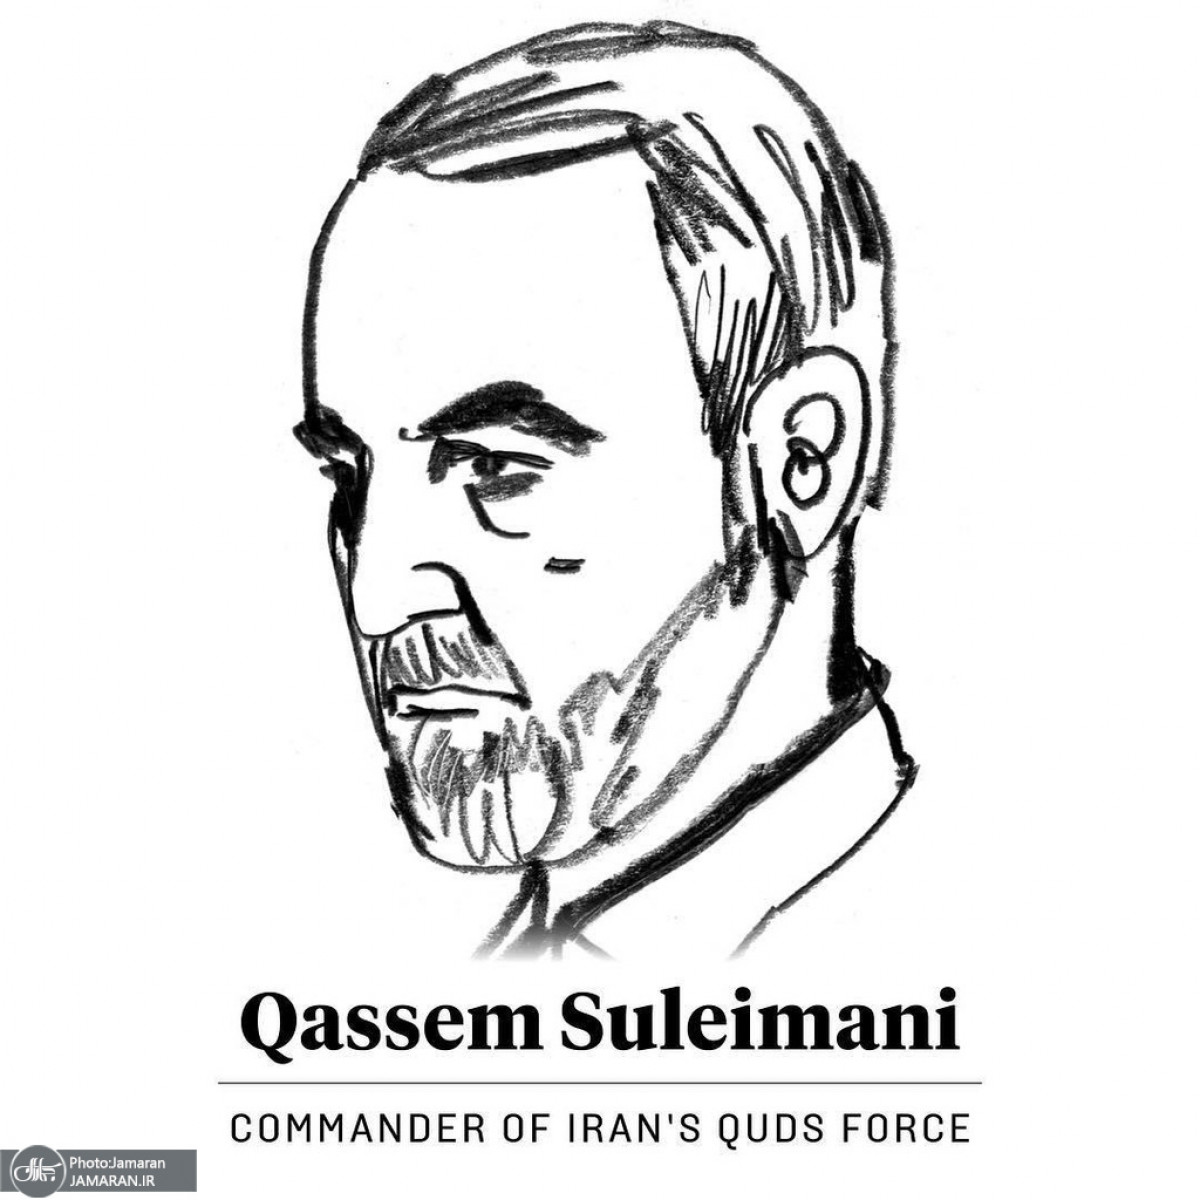 Assassination of Soleimani and threat to bomb cultural sites are war crimes